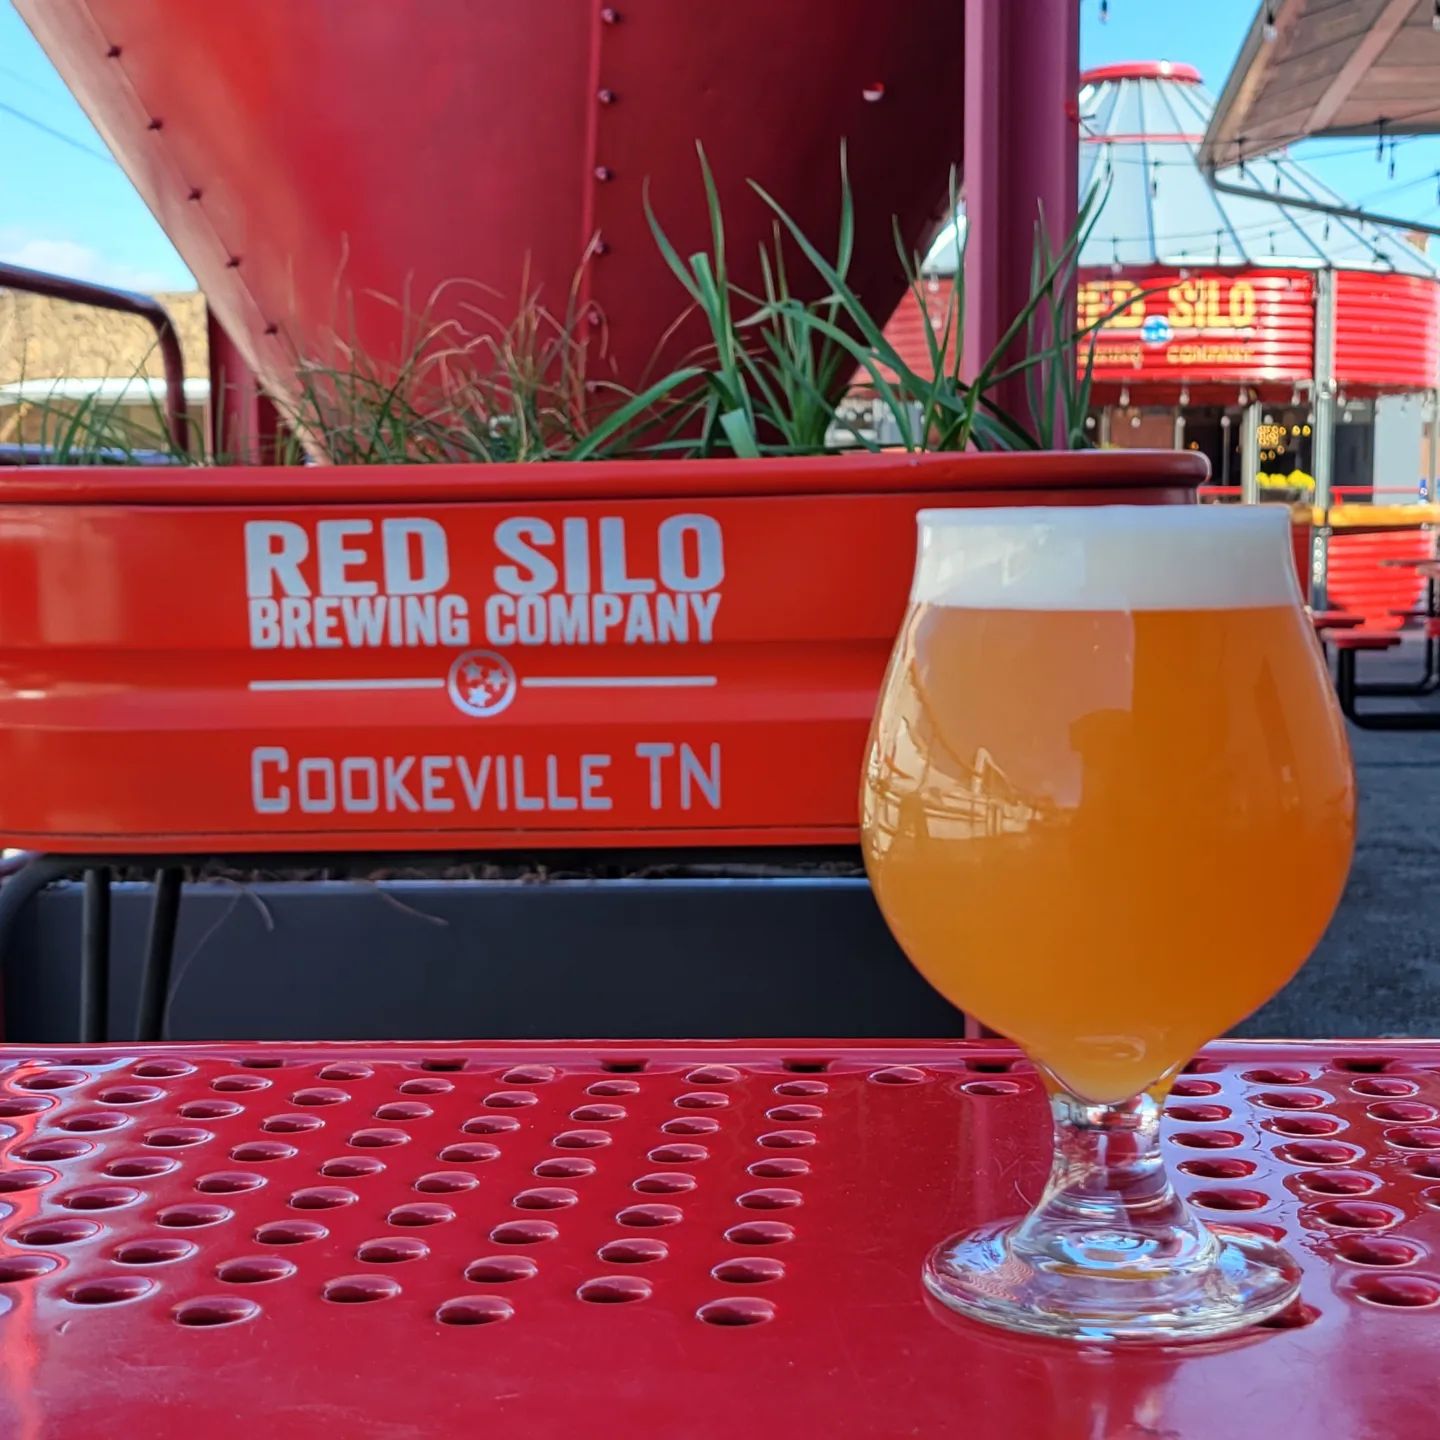 hazy beer on table in front the red silo at red silo brewing company in cookeville tn 